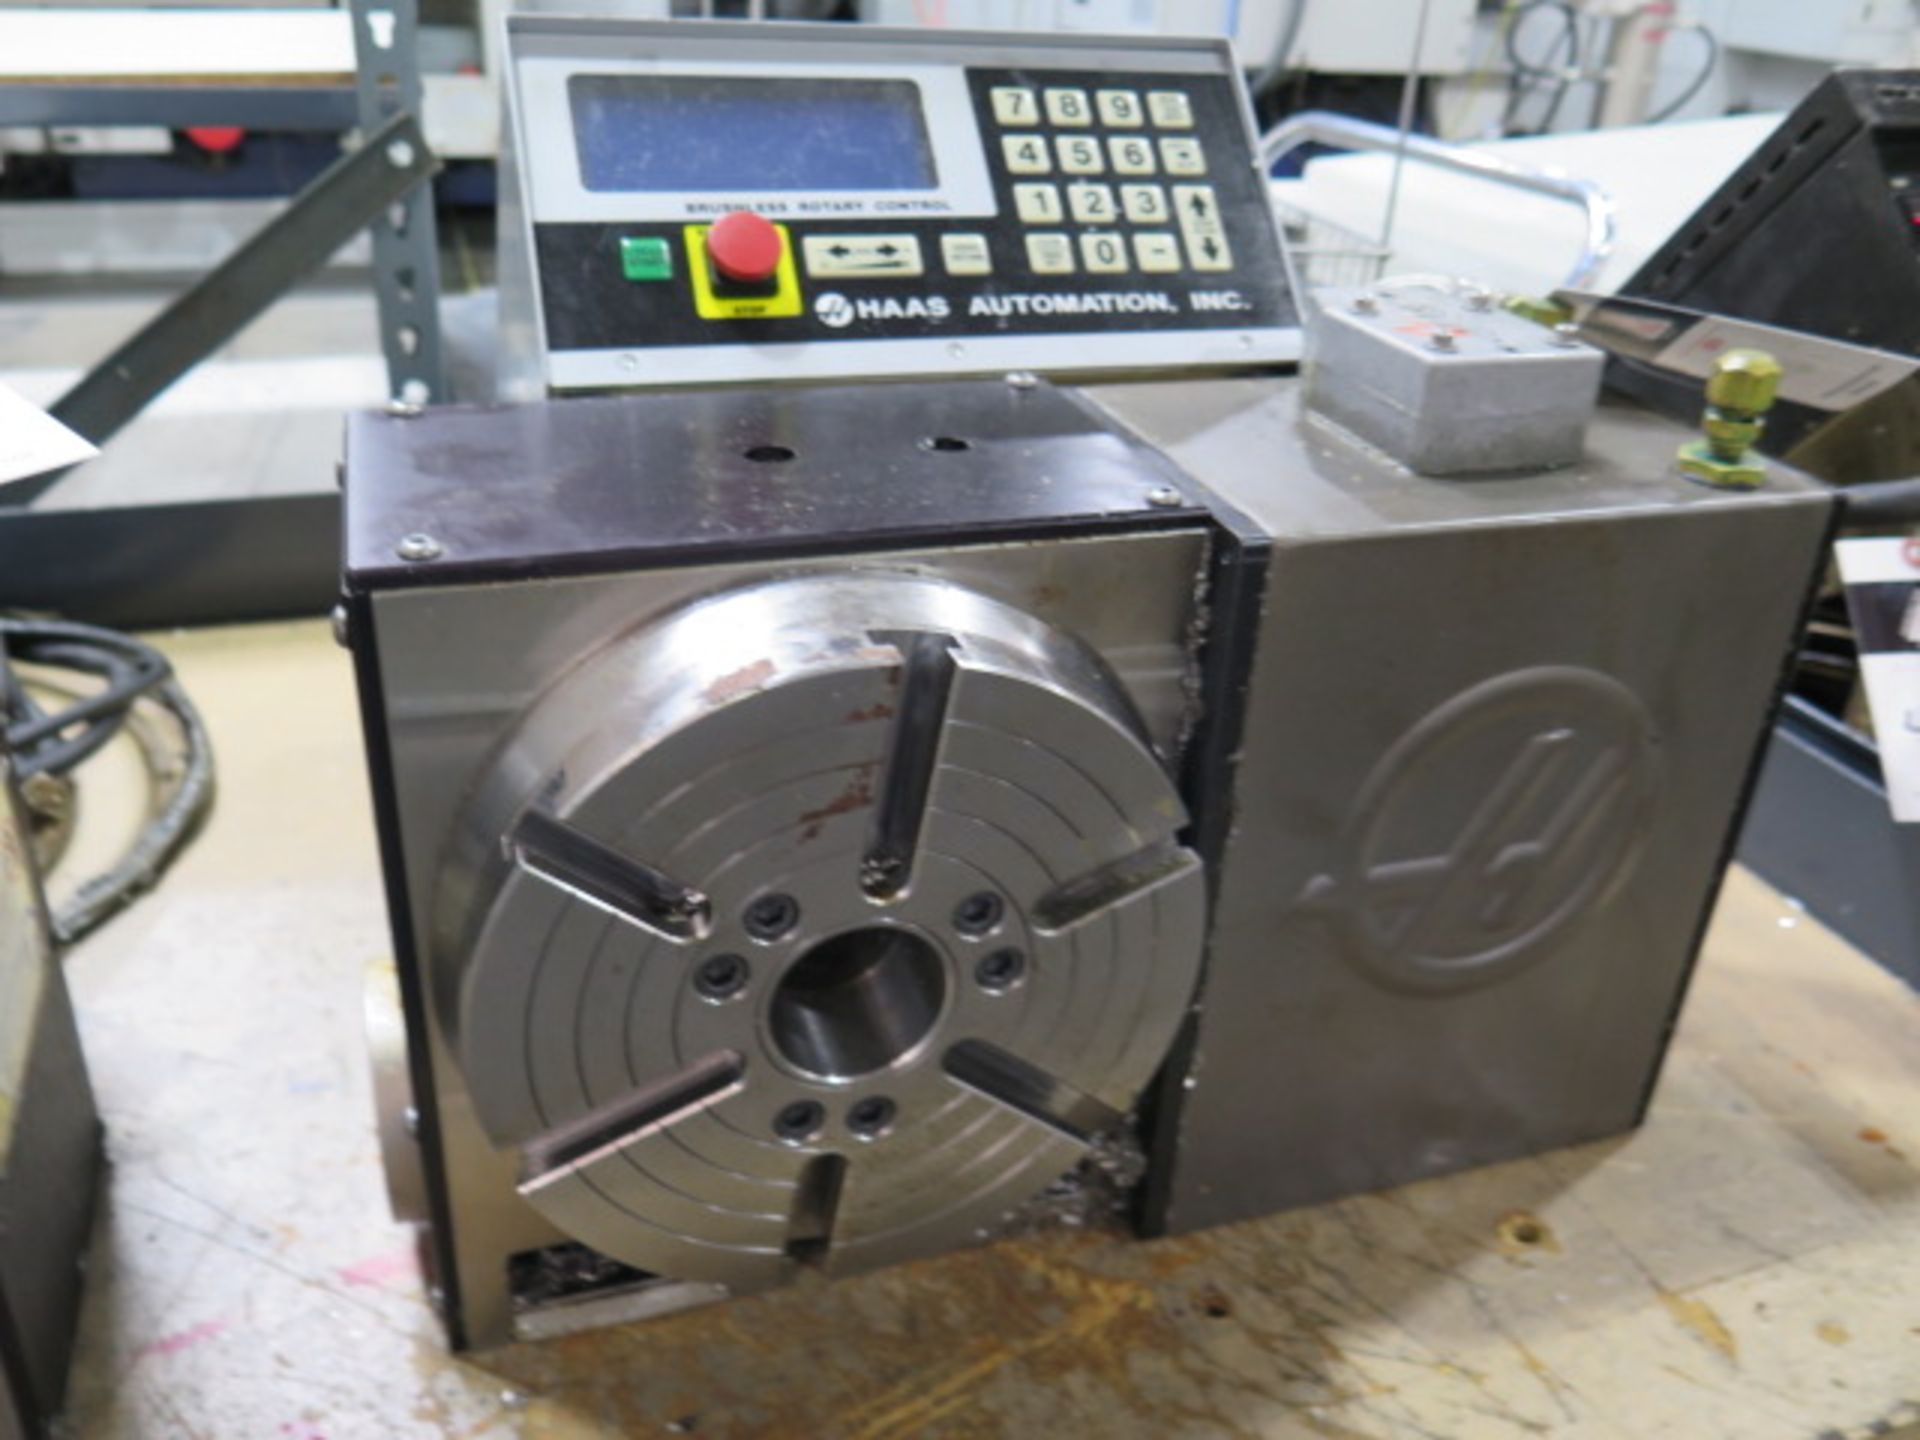 Haas HRT-210 4th Axis 8” Rotary Table w/ Haas Servo Controller (SOLD AS-IS - NO WARRANTY) - Bild 2 aus 7